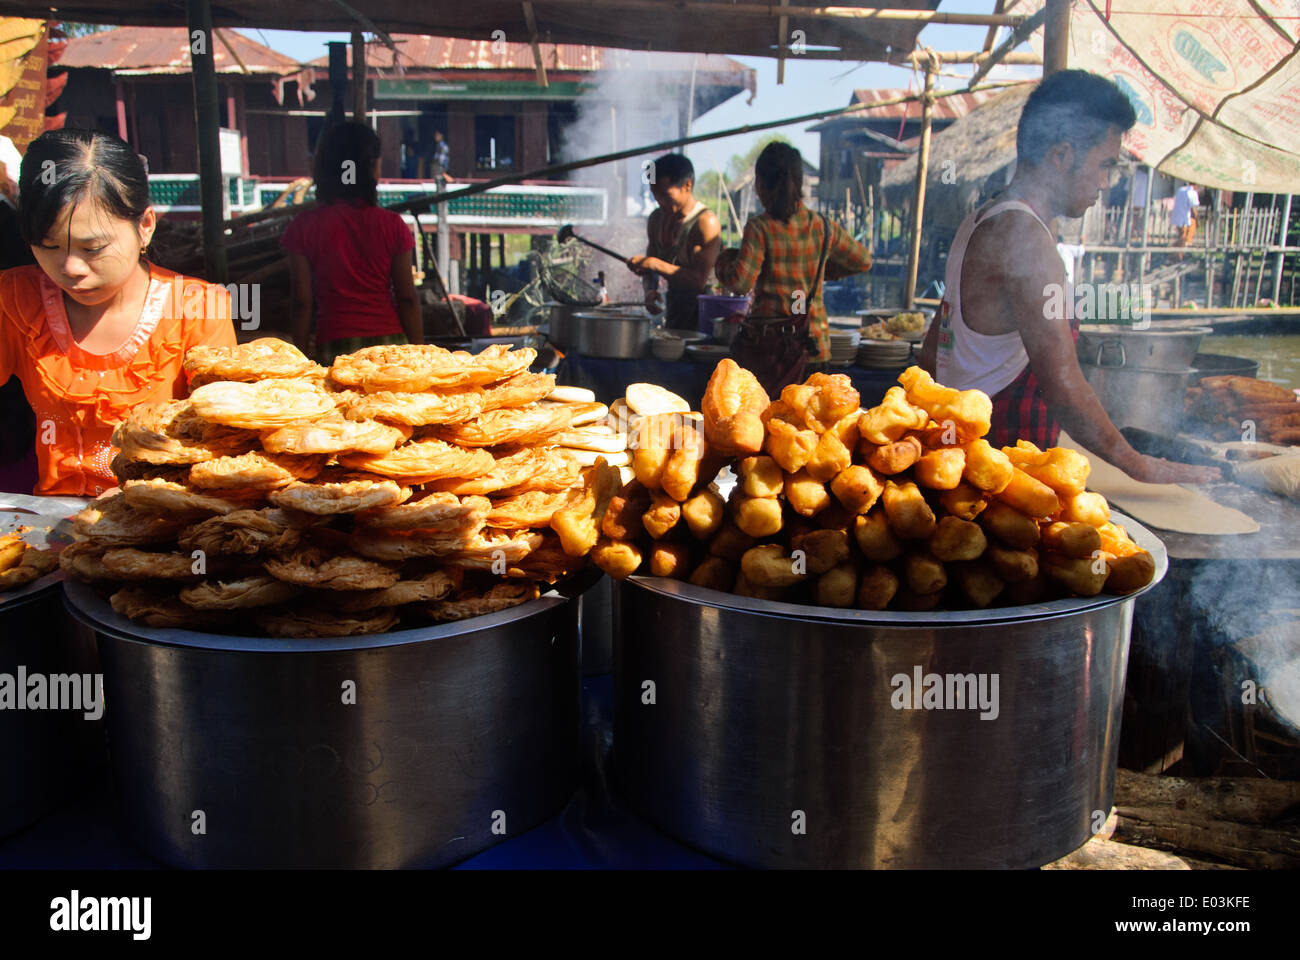 Street food in a village during a festival. Stock Photo